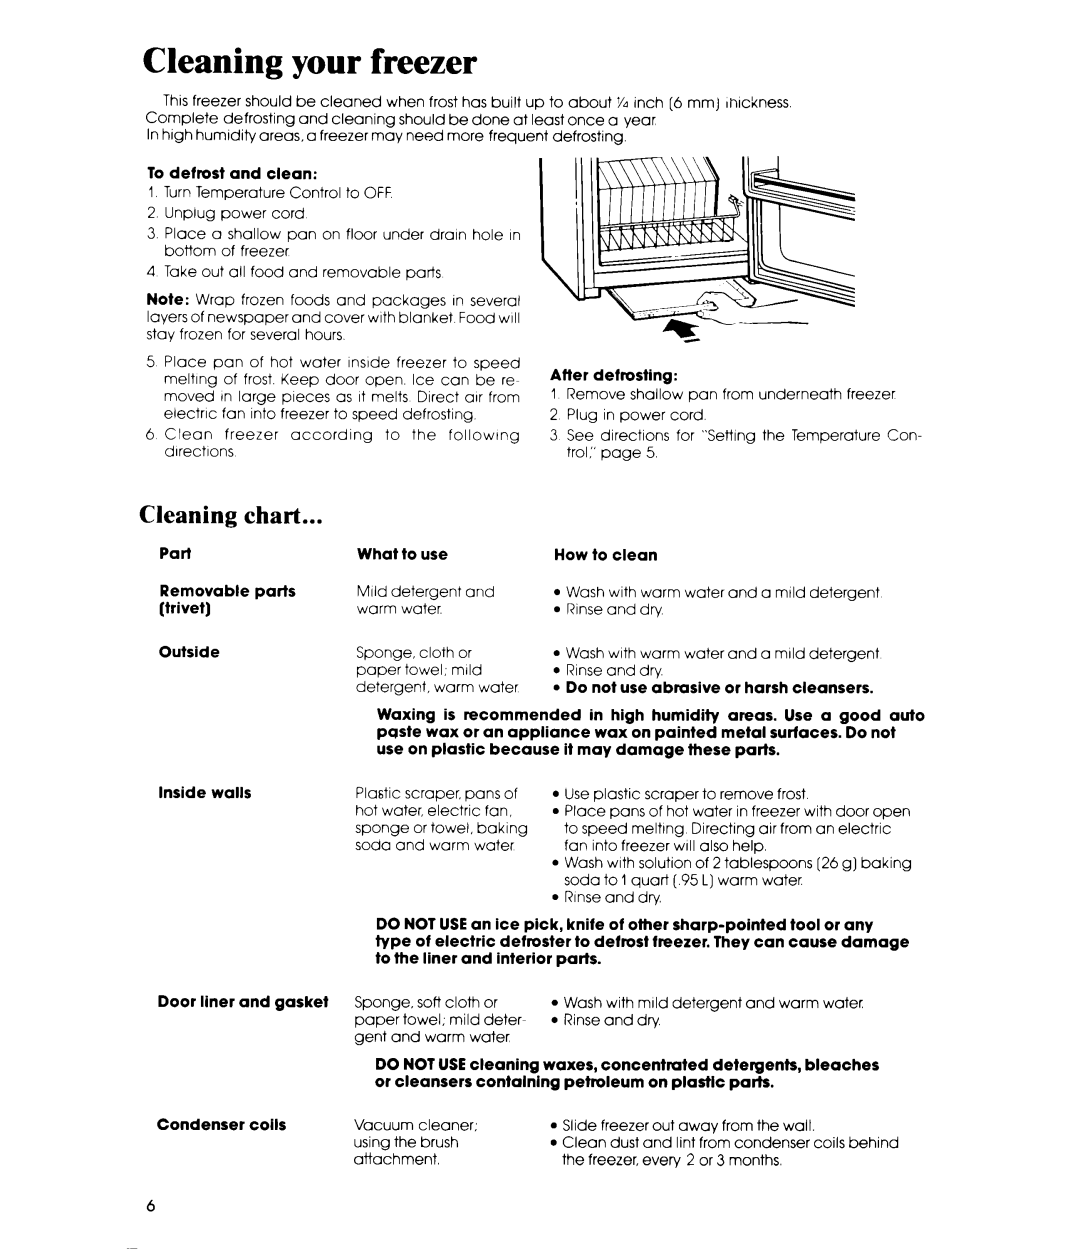 Whirlpool EV150C manual Cleaning your freezer, chart 